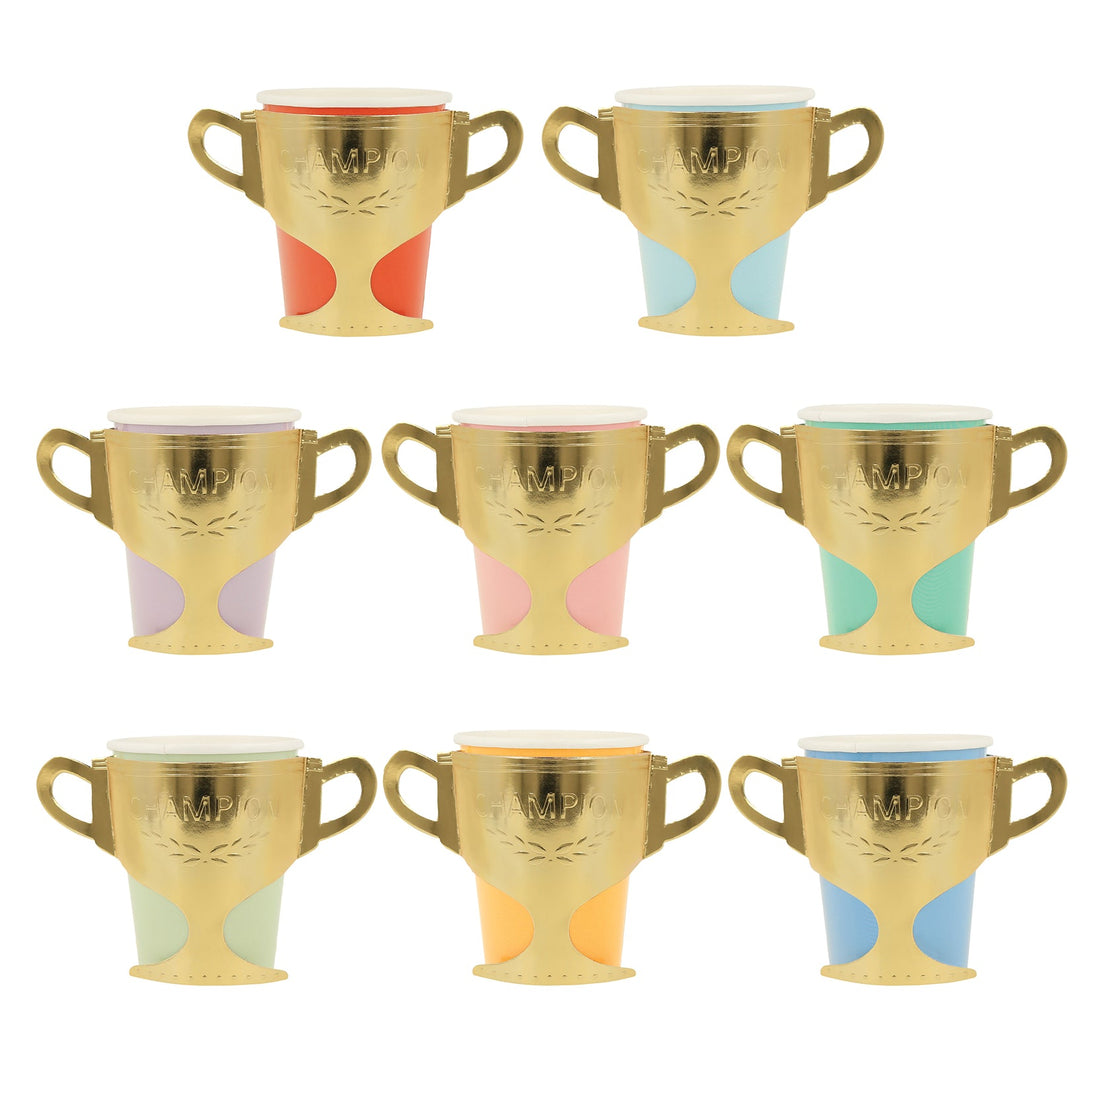 Nine Champion Cups with varying handle colors displayed in a grid pattern, resembling sustainable party cups by Meri Meri.